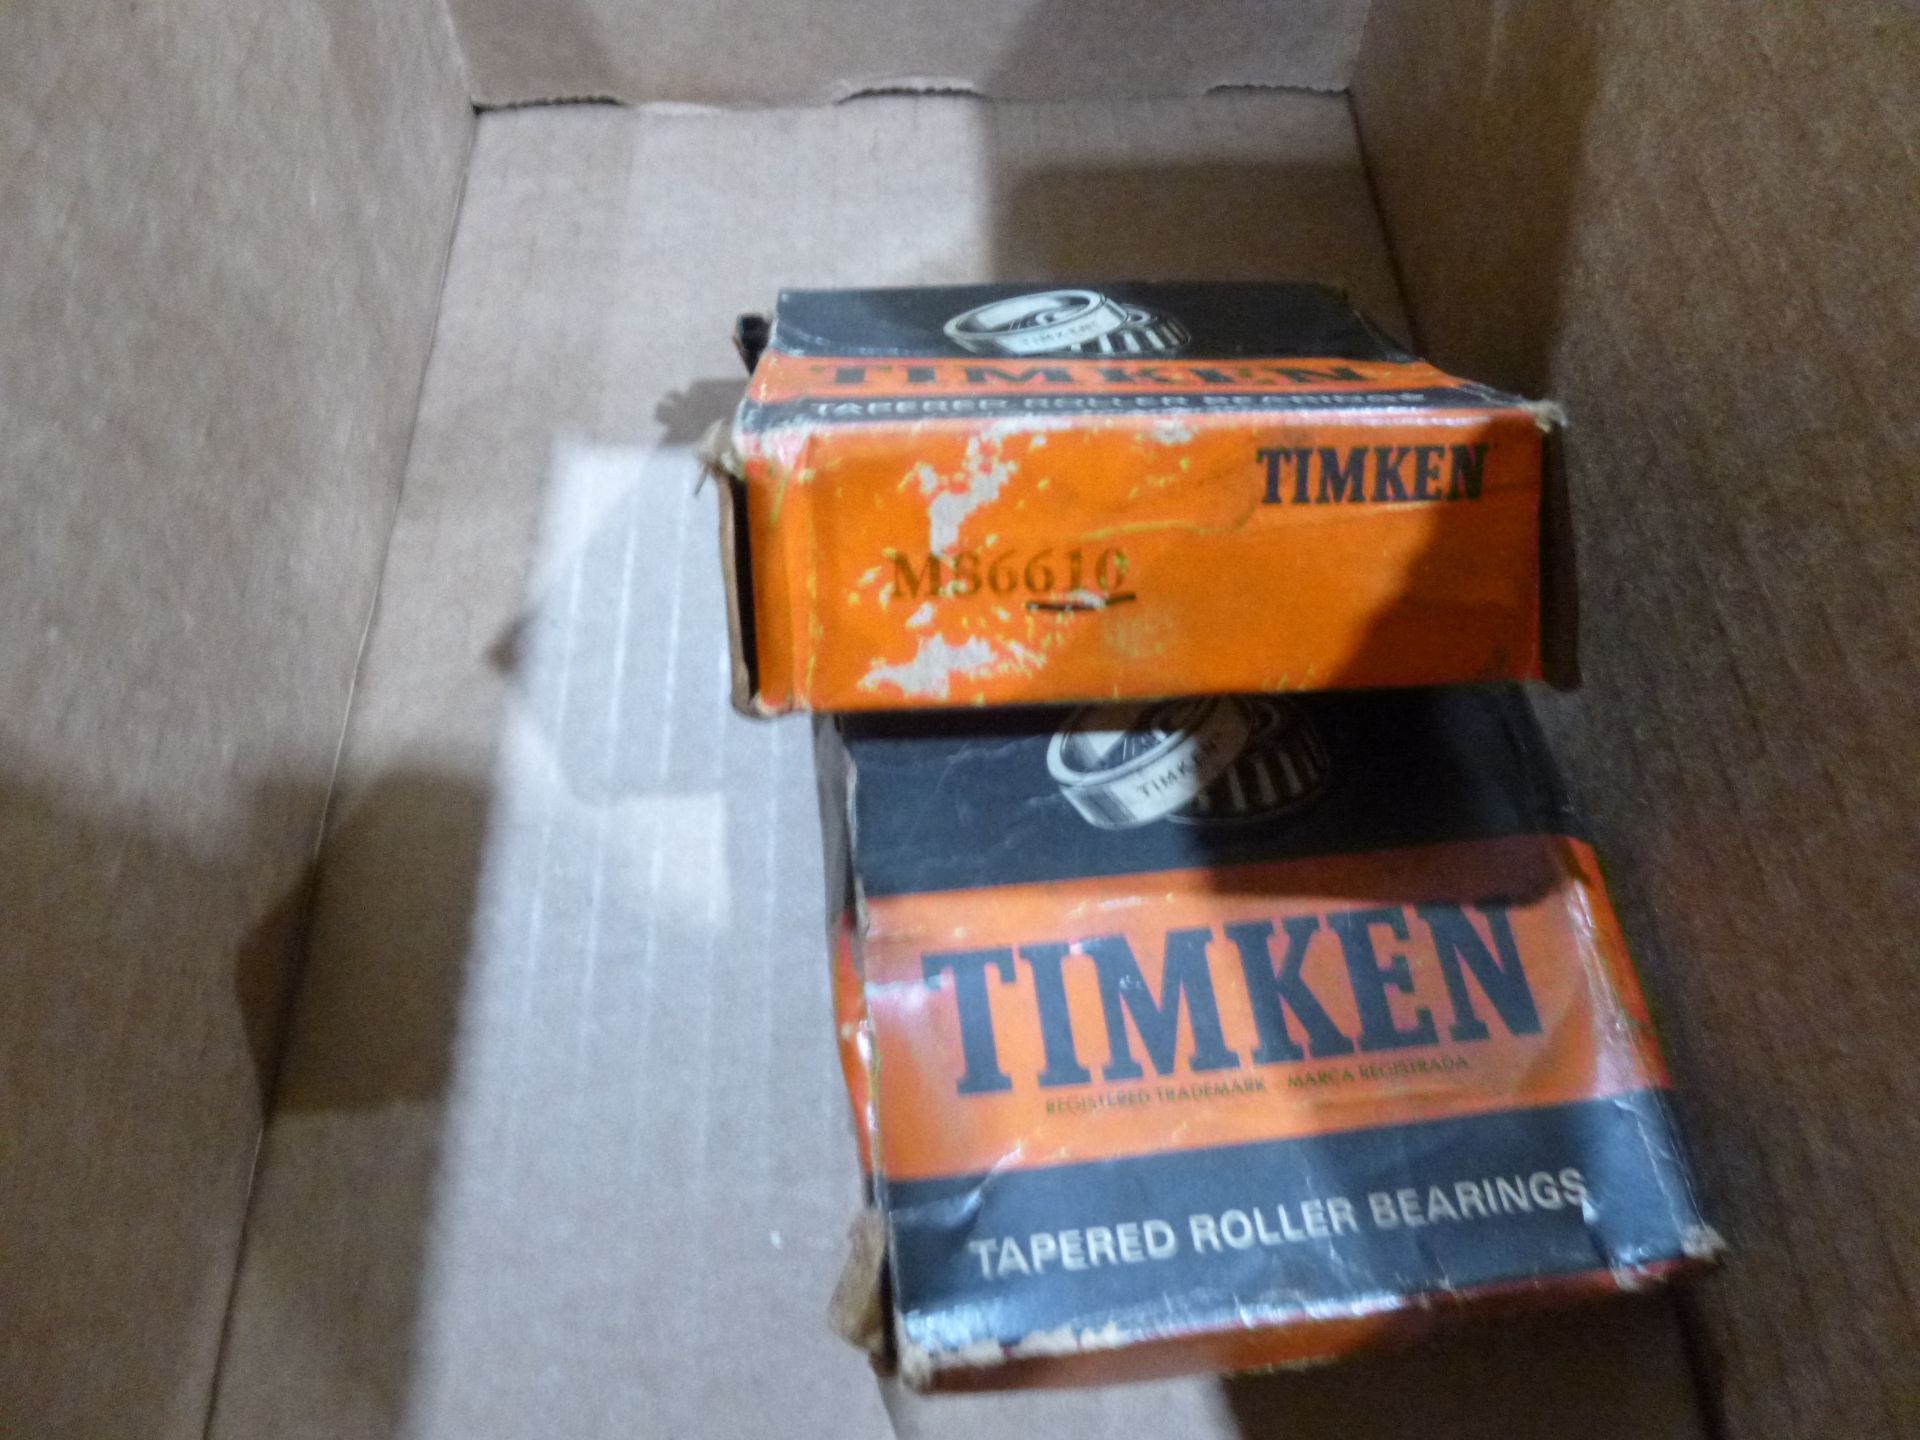 Qty 2 Timken bearing MS6610, as always with Brolyn LLC auctions, all lots can be picked up from - Image 2 of 2